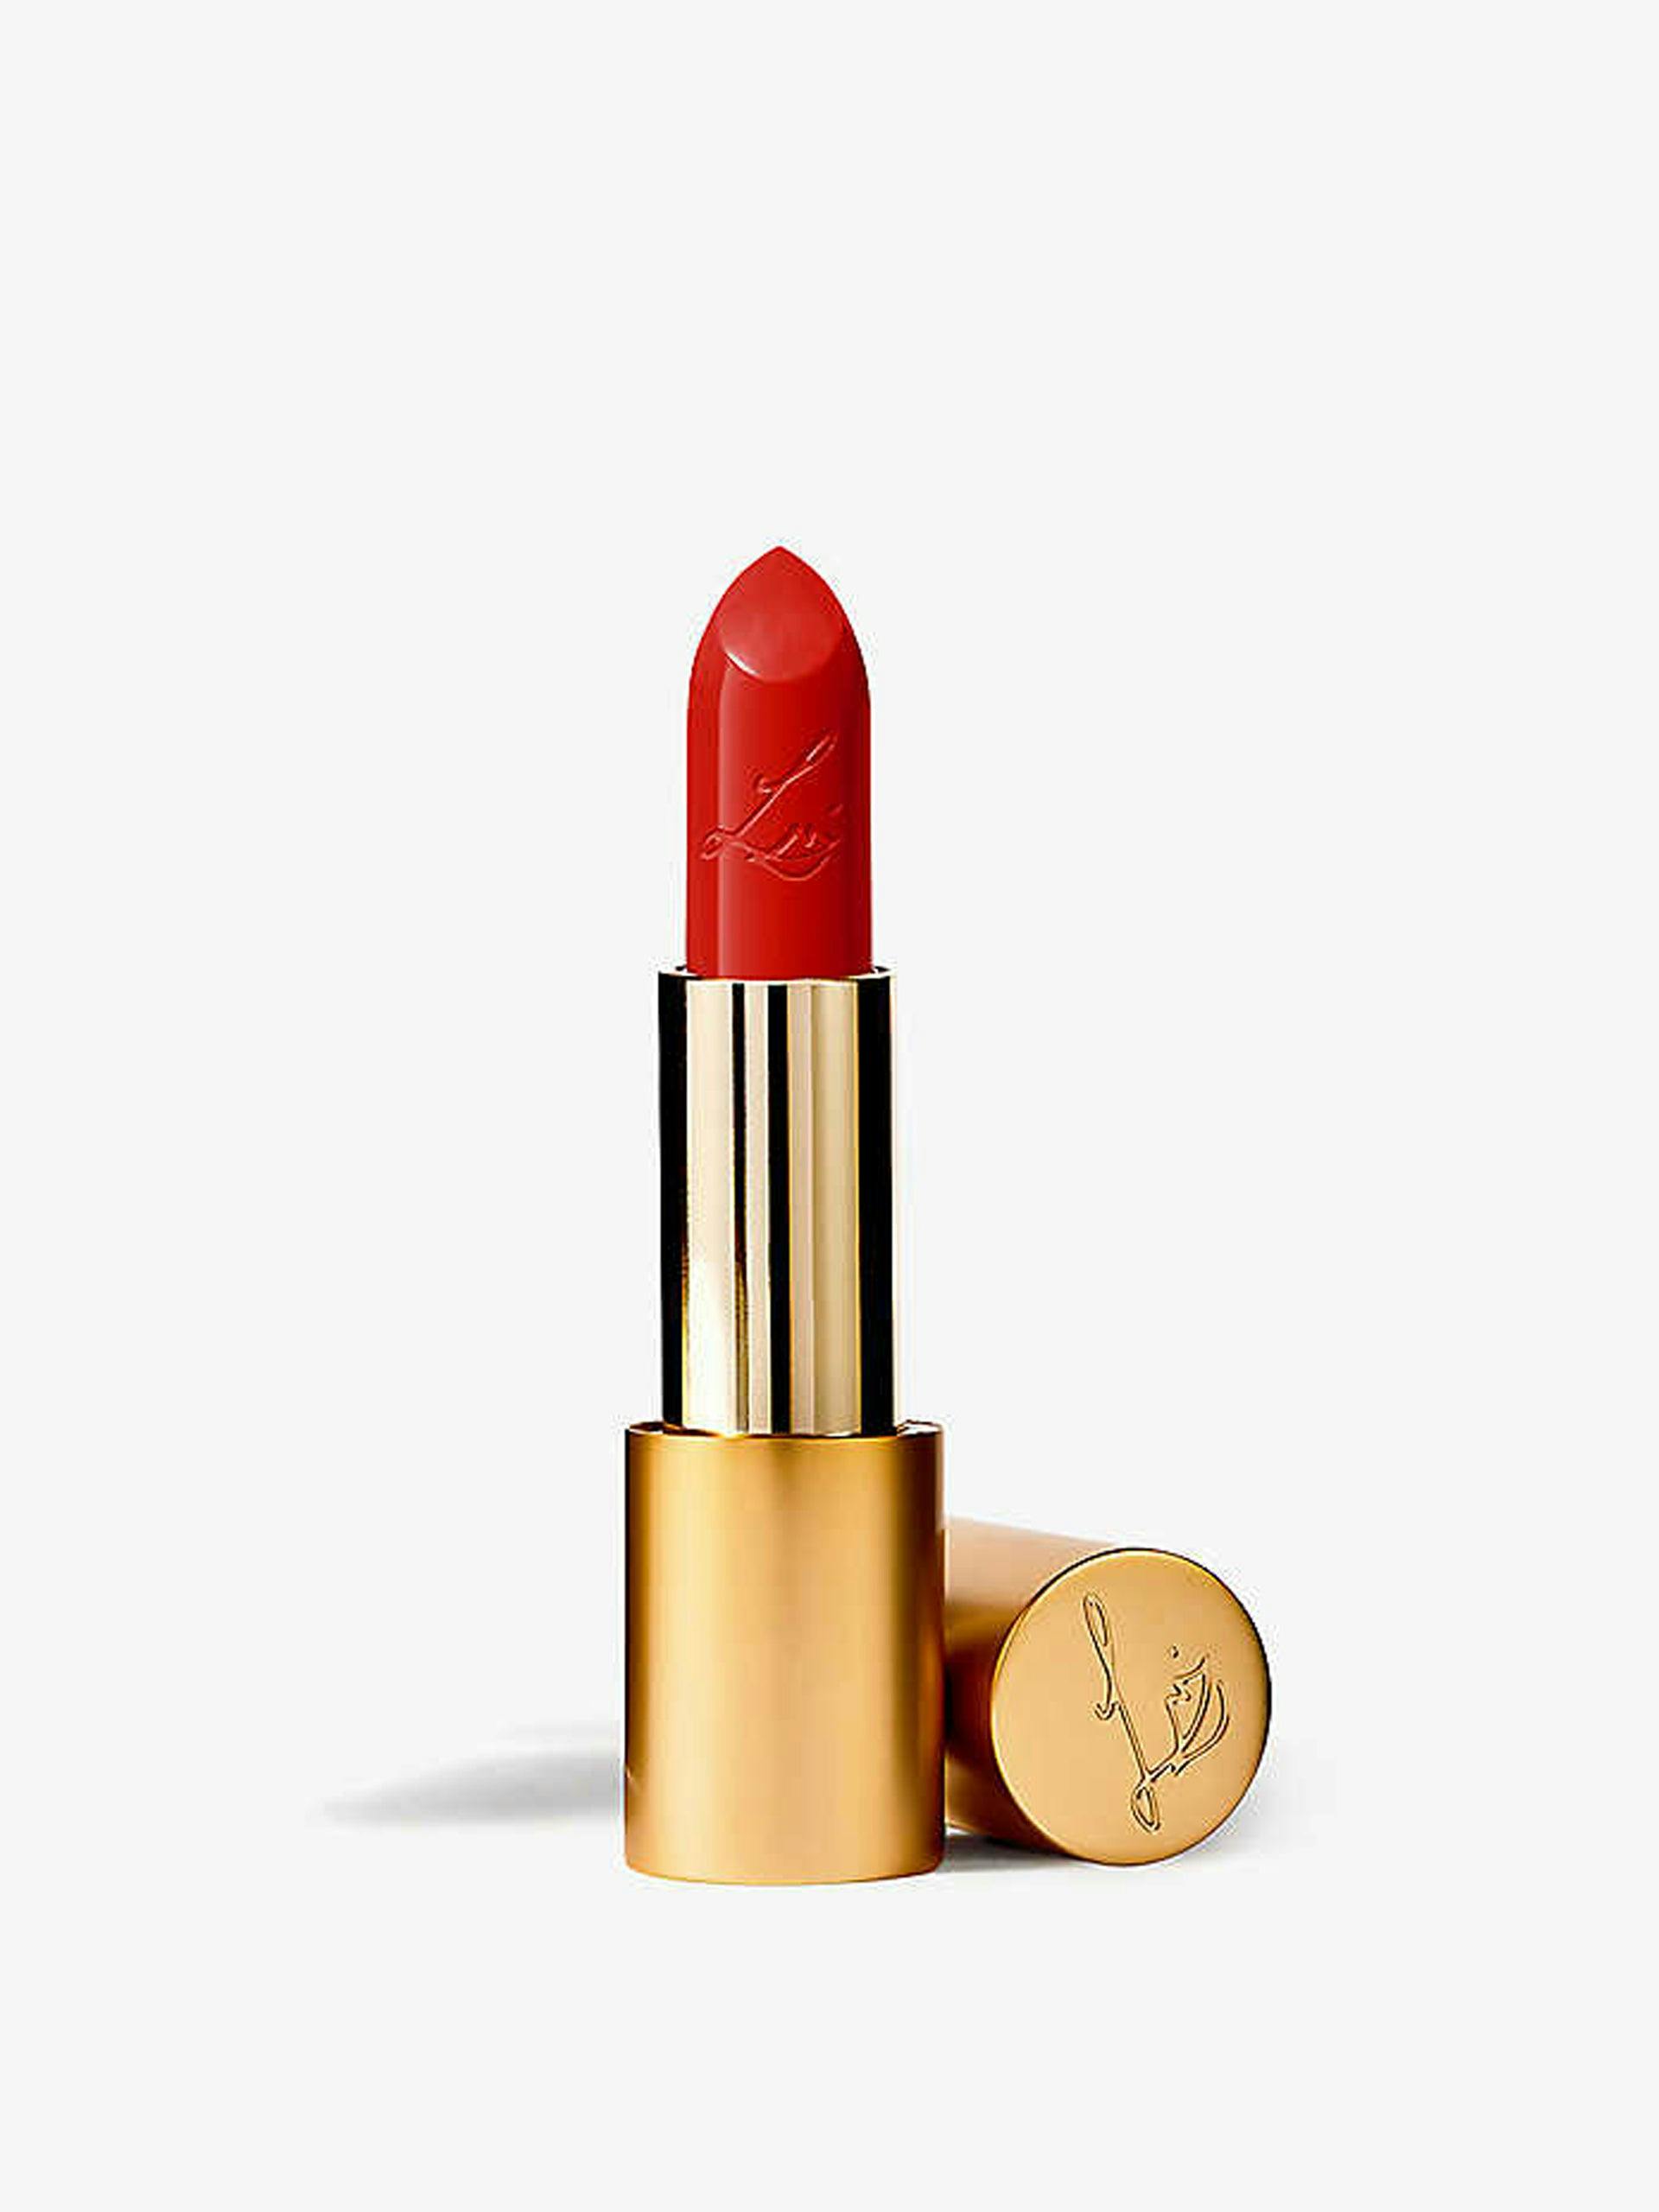 Luxuriously Lucent lipstick in atomic cherry